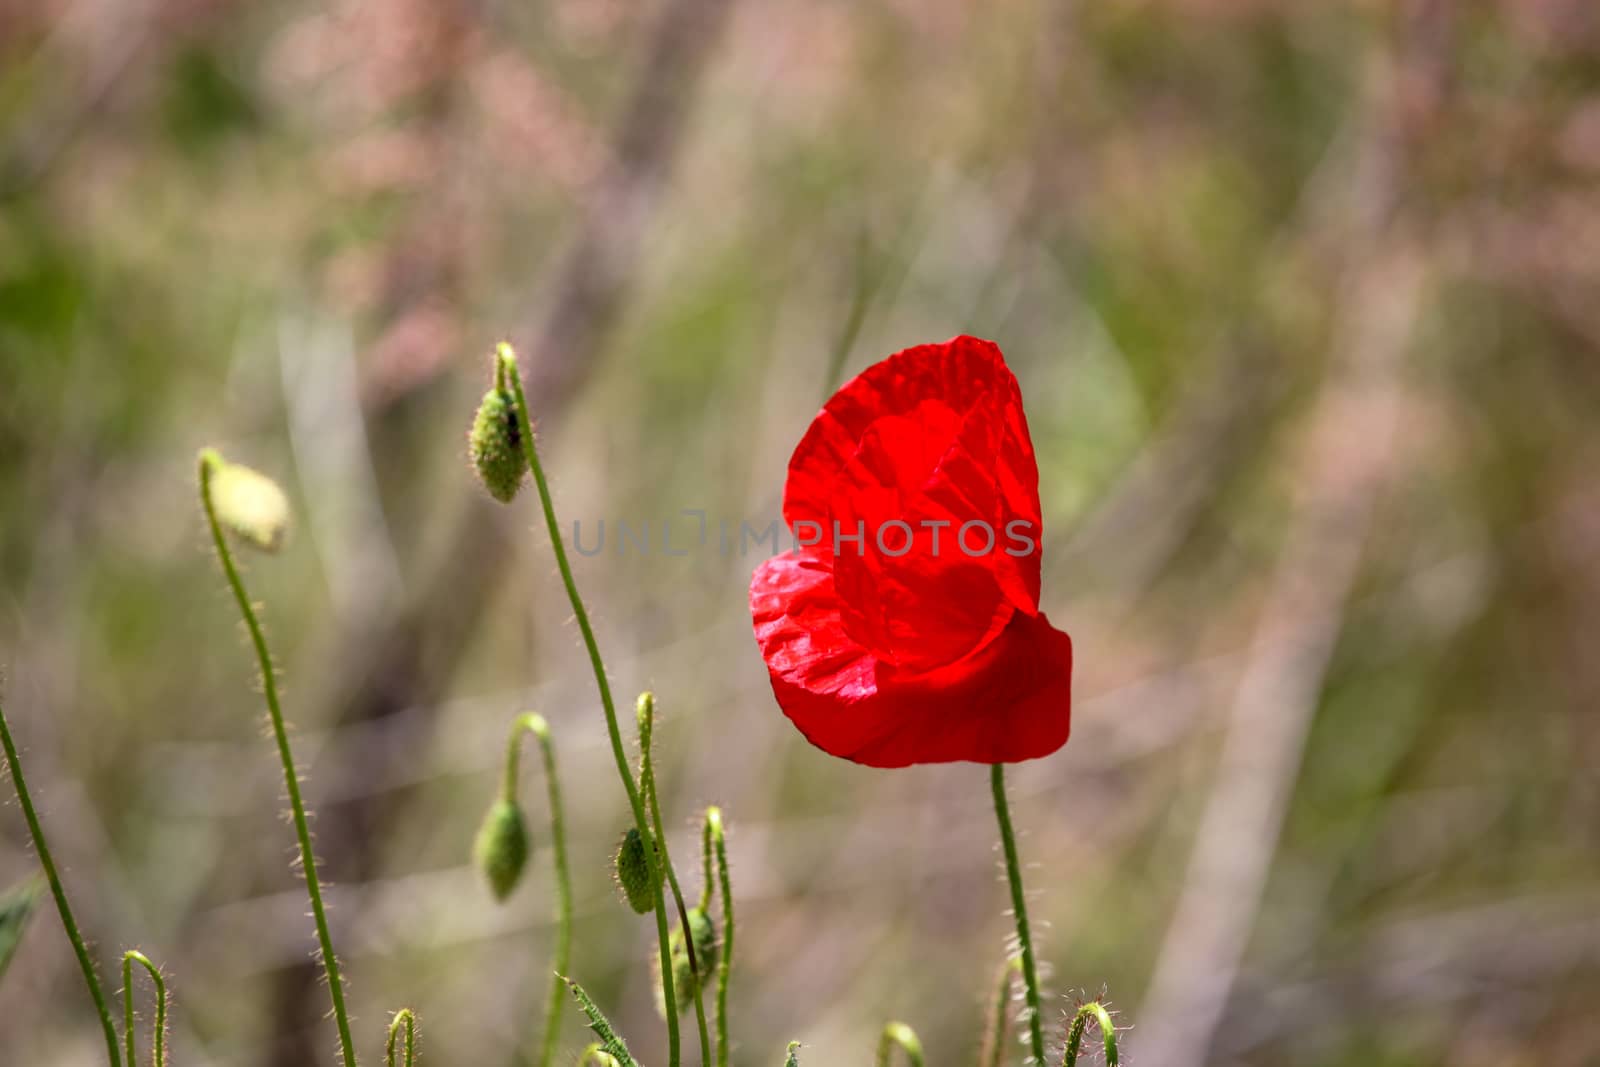 A Poppy Is A Flowering Plant In The Subfamily Papaveroideae Of The Family Papaveraceae.